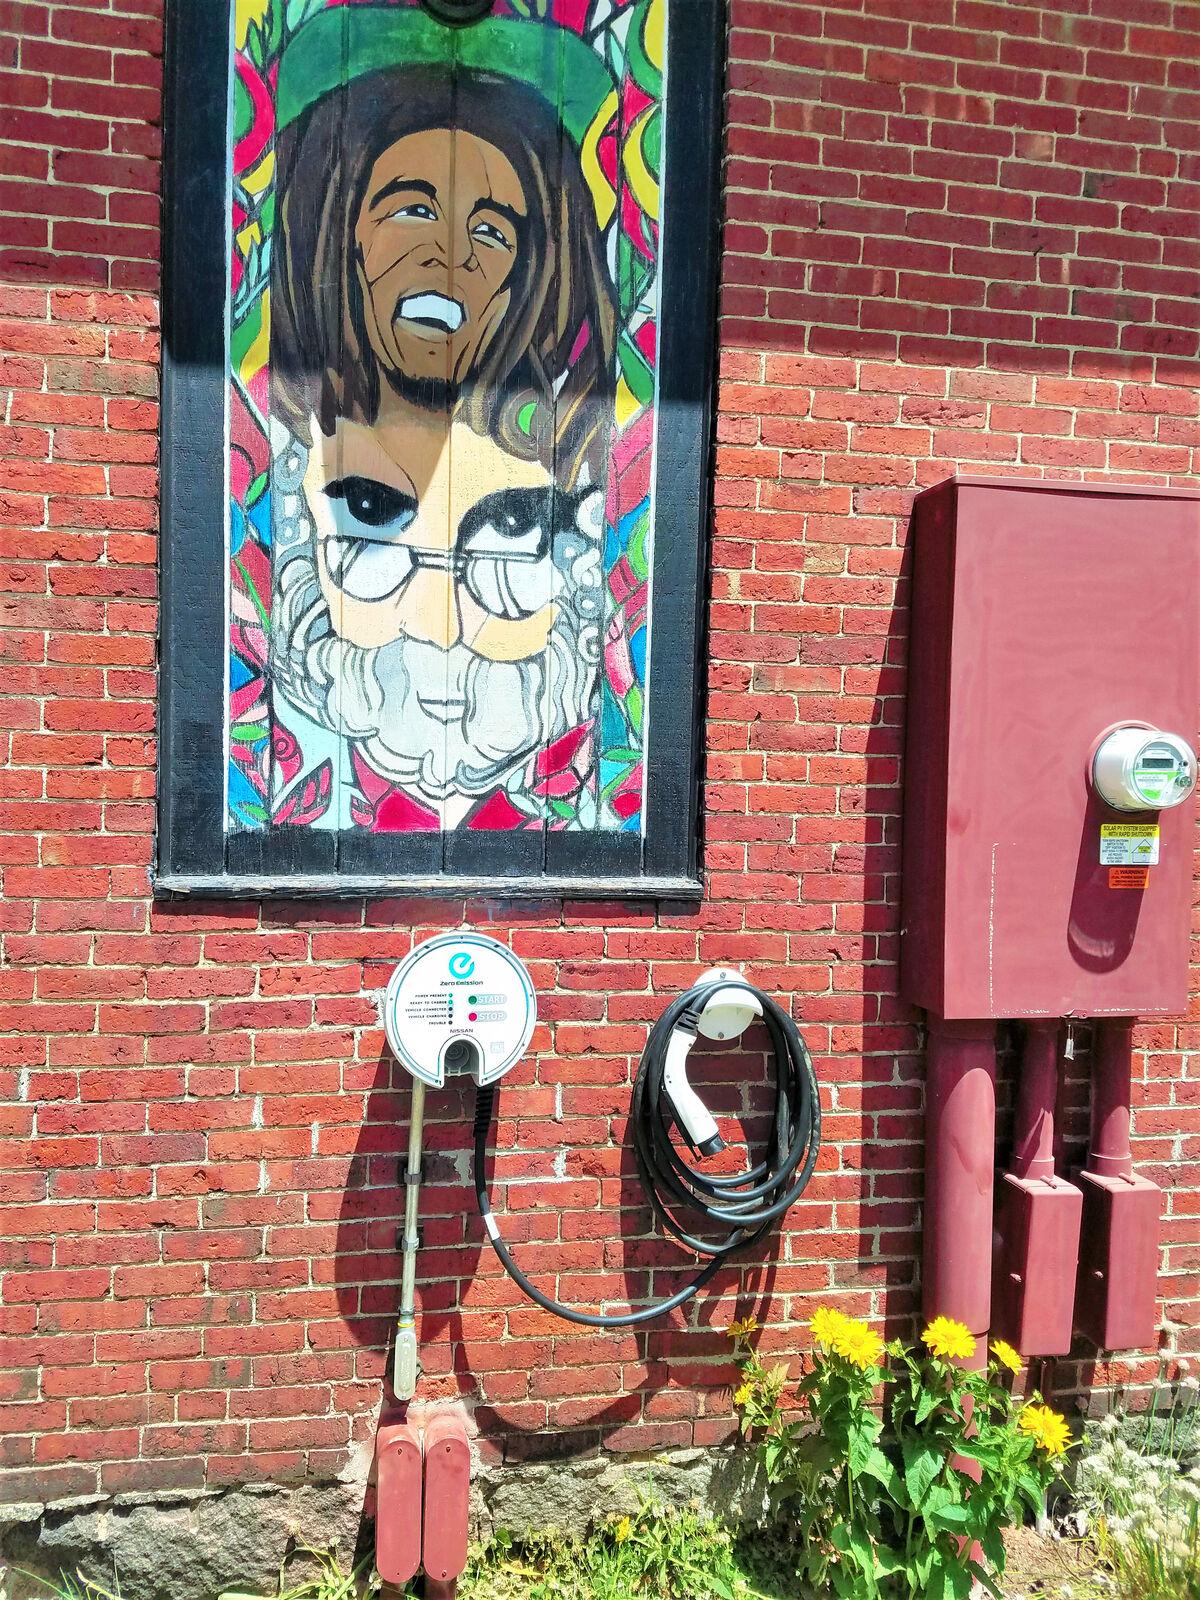 EV Charging Station Outside Of Stone Chuch In NH